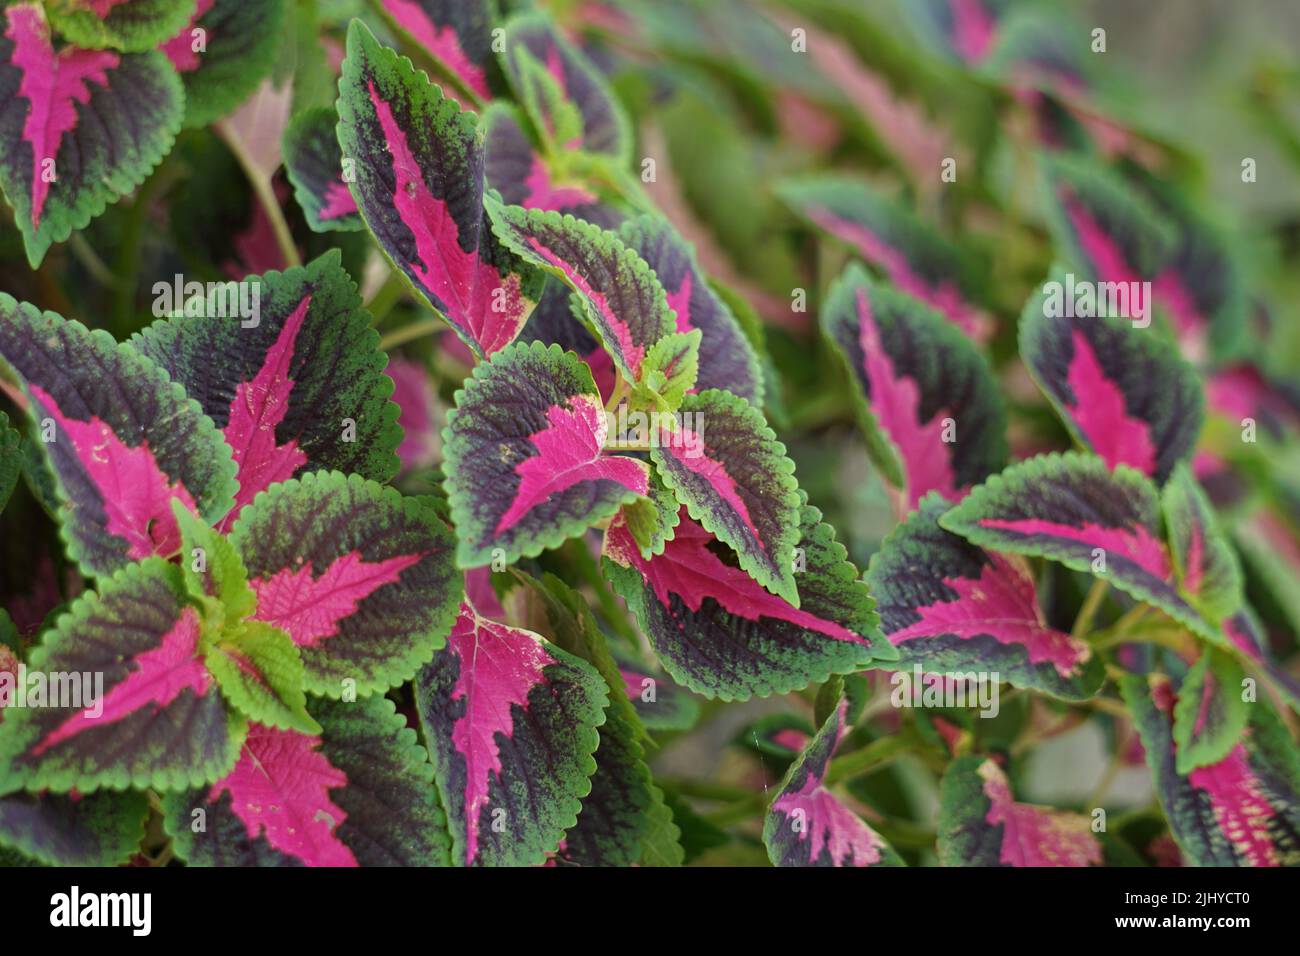 Coleus scutellarioides with a natural background Stock Photo